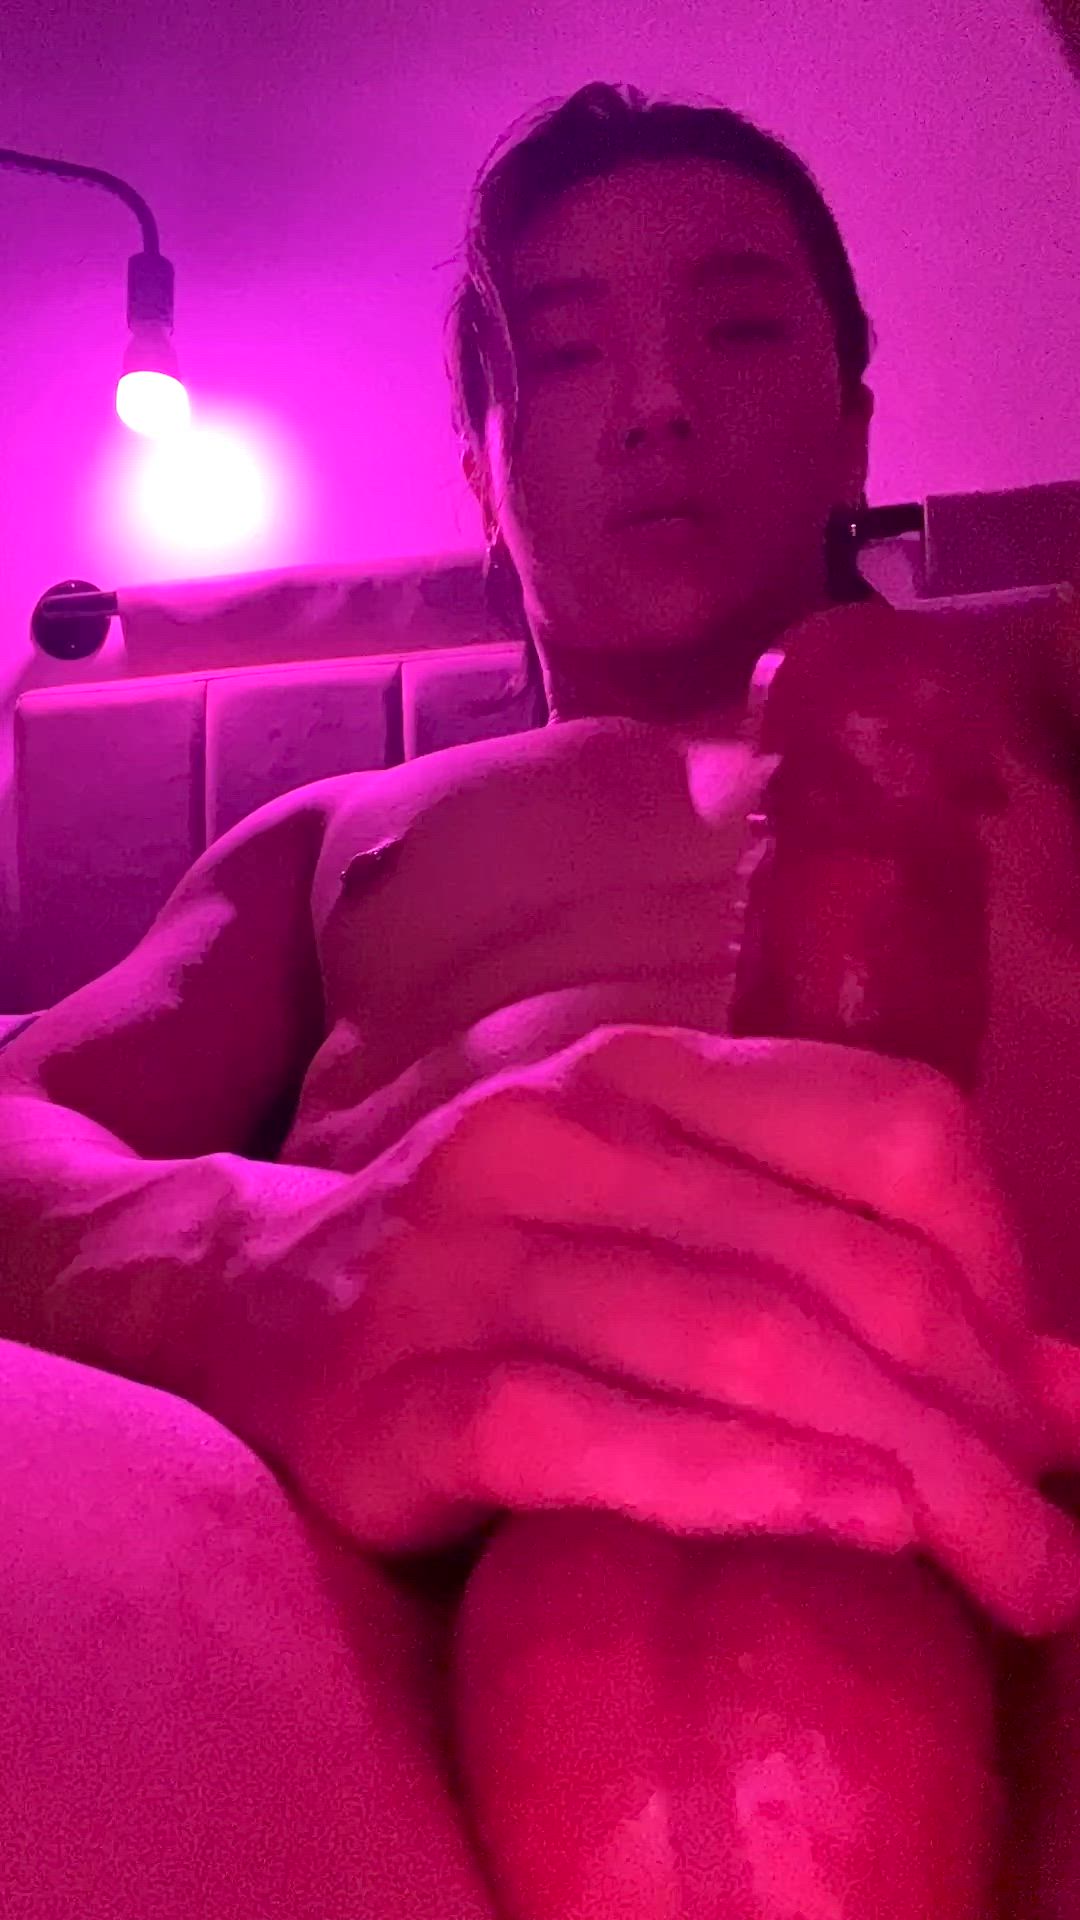 Cock porn video with onlyfans model softgymbro <strong>@softgymbro</strong>